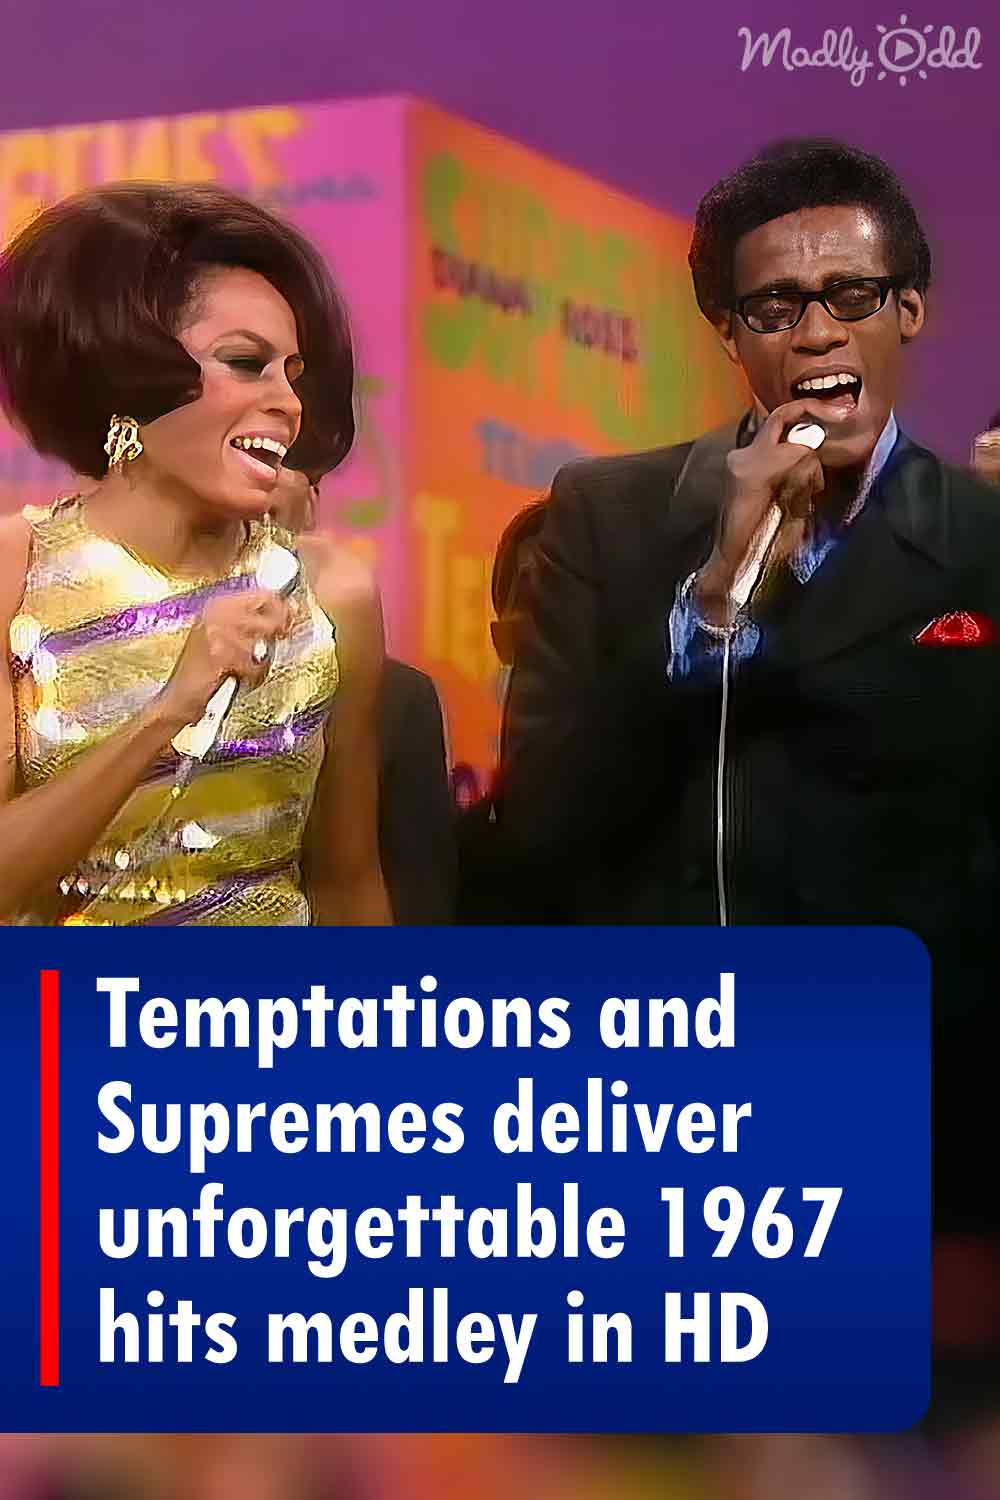 Temptations and Supremes deliver unforgettable 1967 hits medley in HD